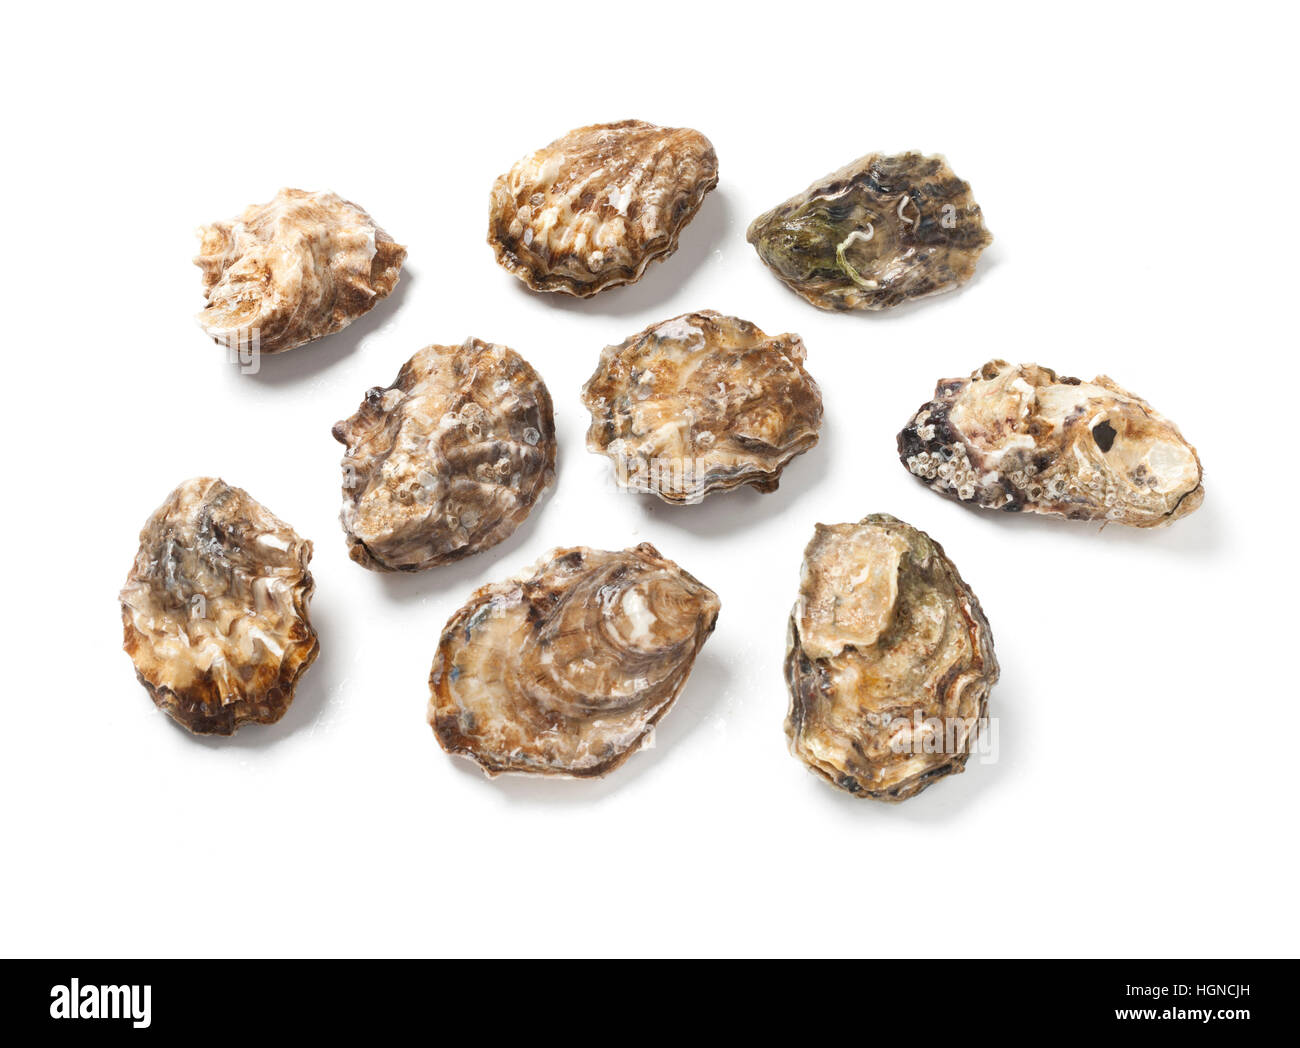 Oysters against white background Stock Photo